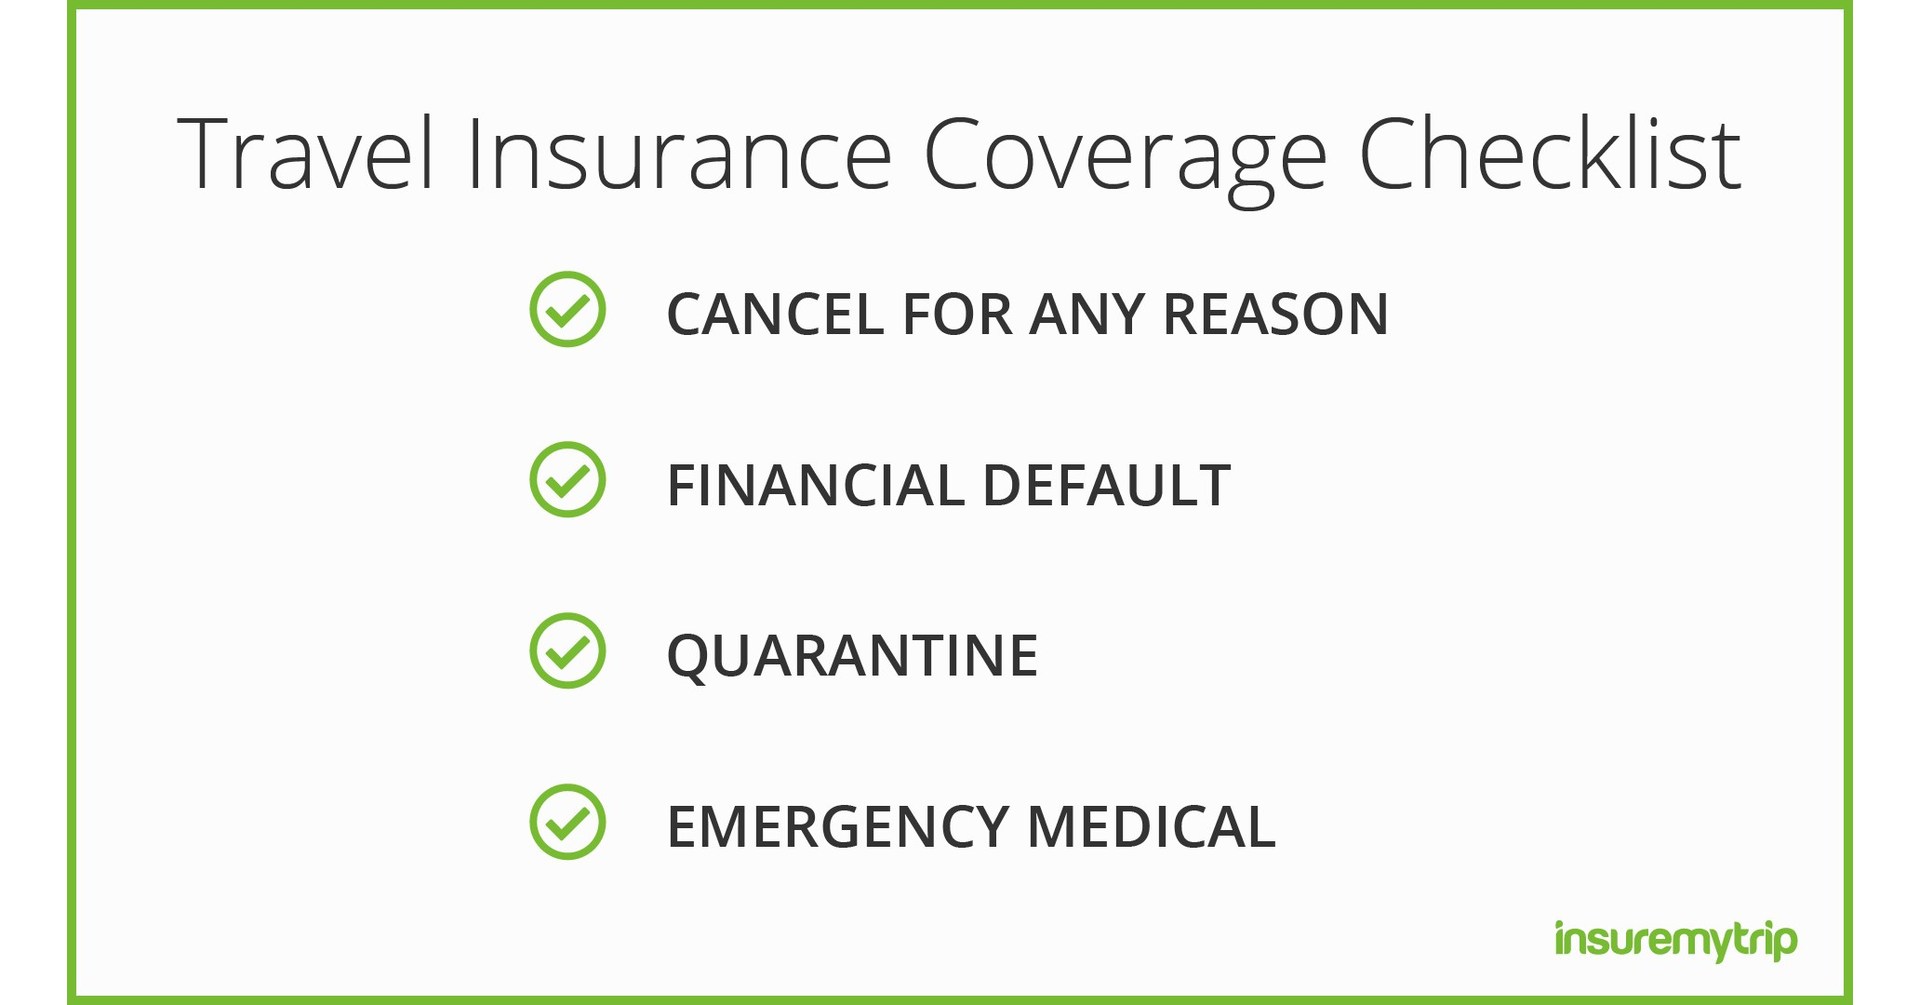 Insuremytrip Issues New Travel Insurance Checklist For Travelers